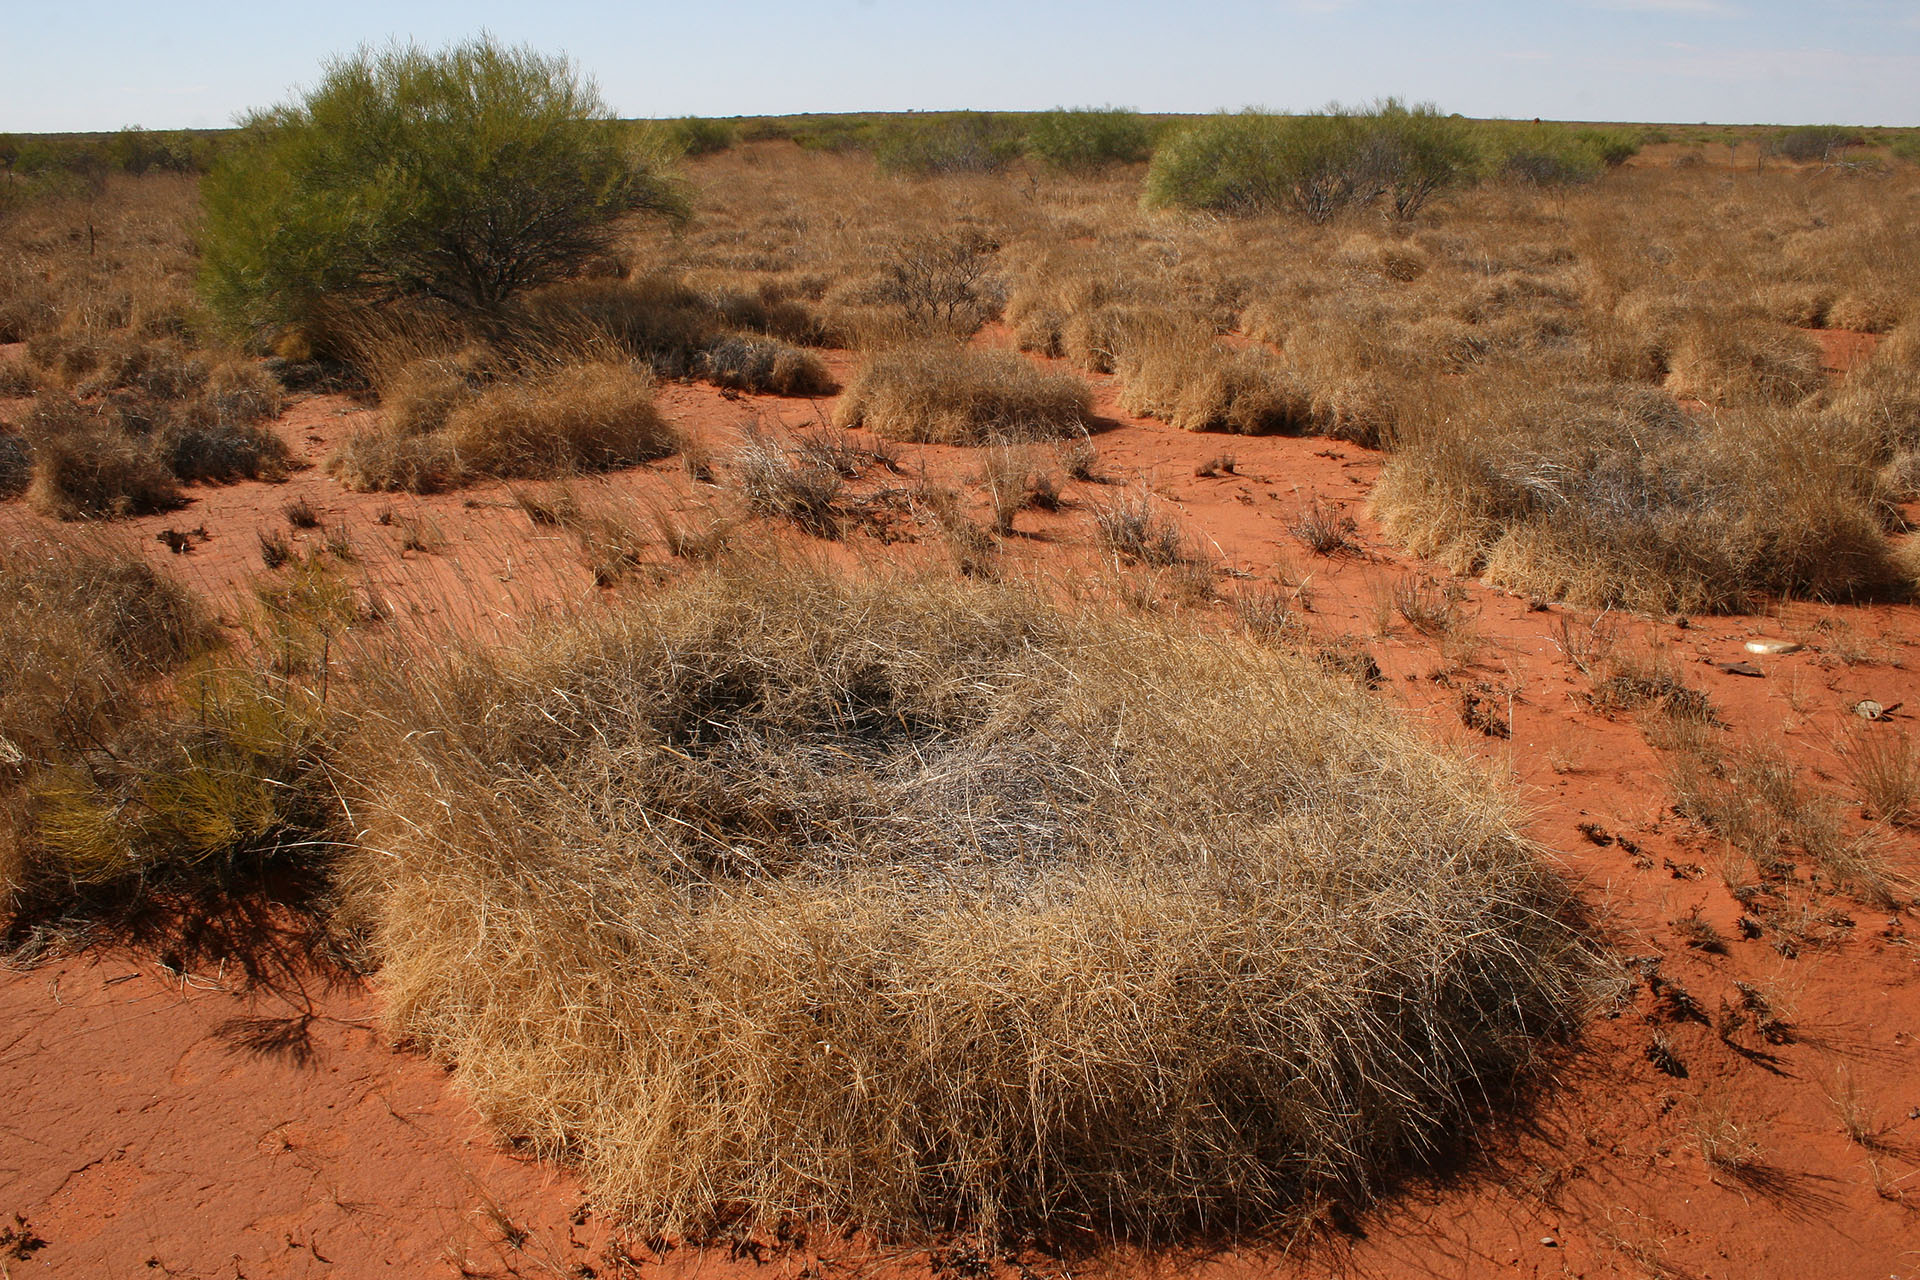 Dry grass is coiled into these circular shapes.